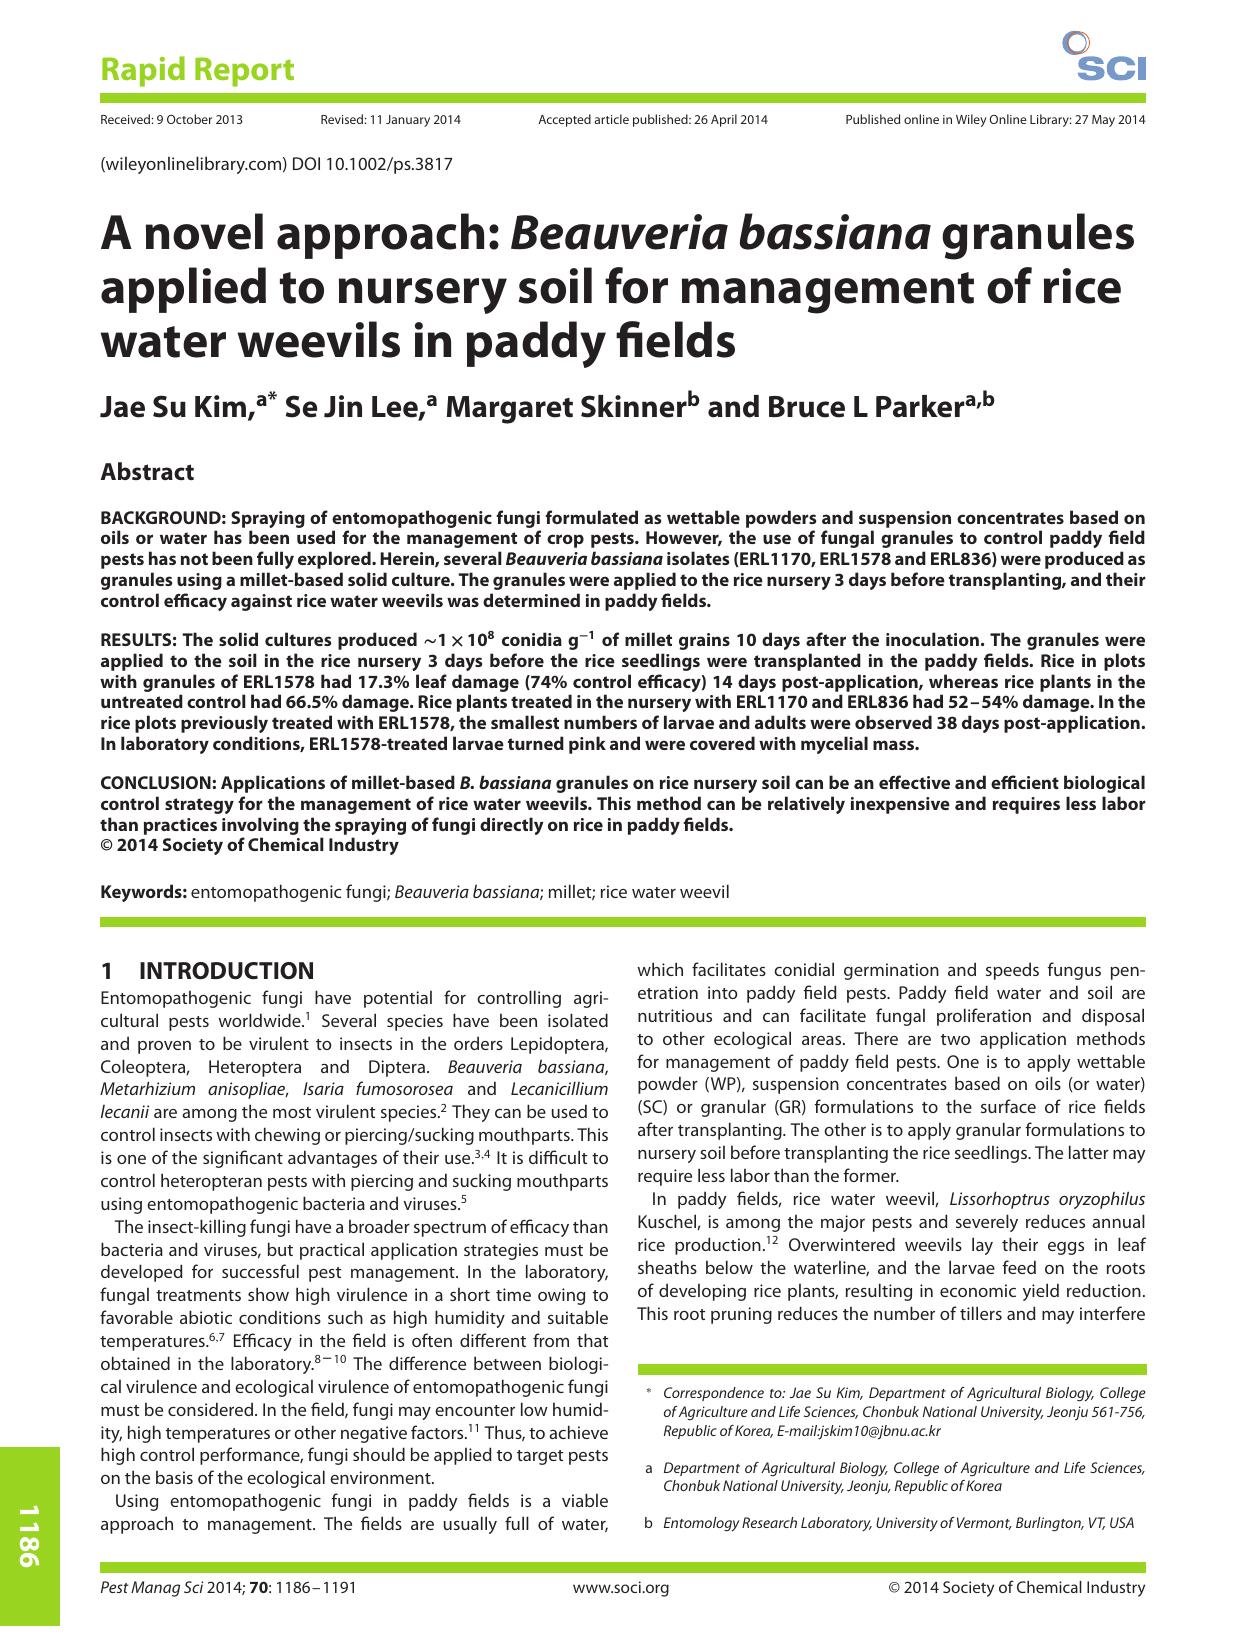 A novel approach: Beauveria bassiana granules applied to nursery soil for management of rice water weevils in paddy fields by Unknown